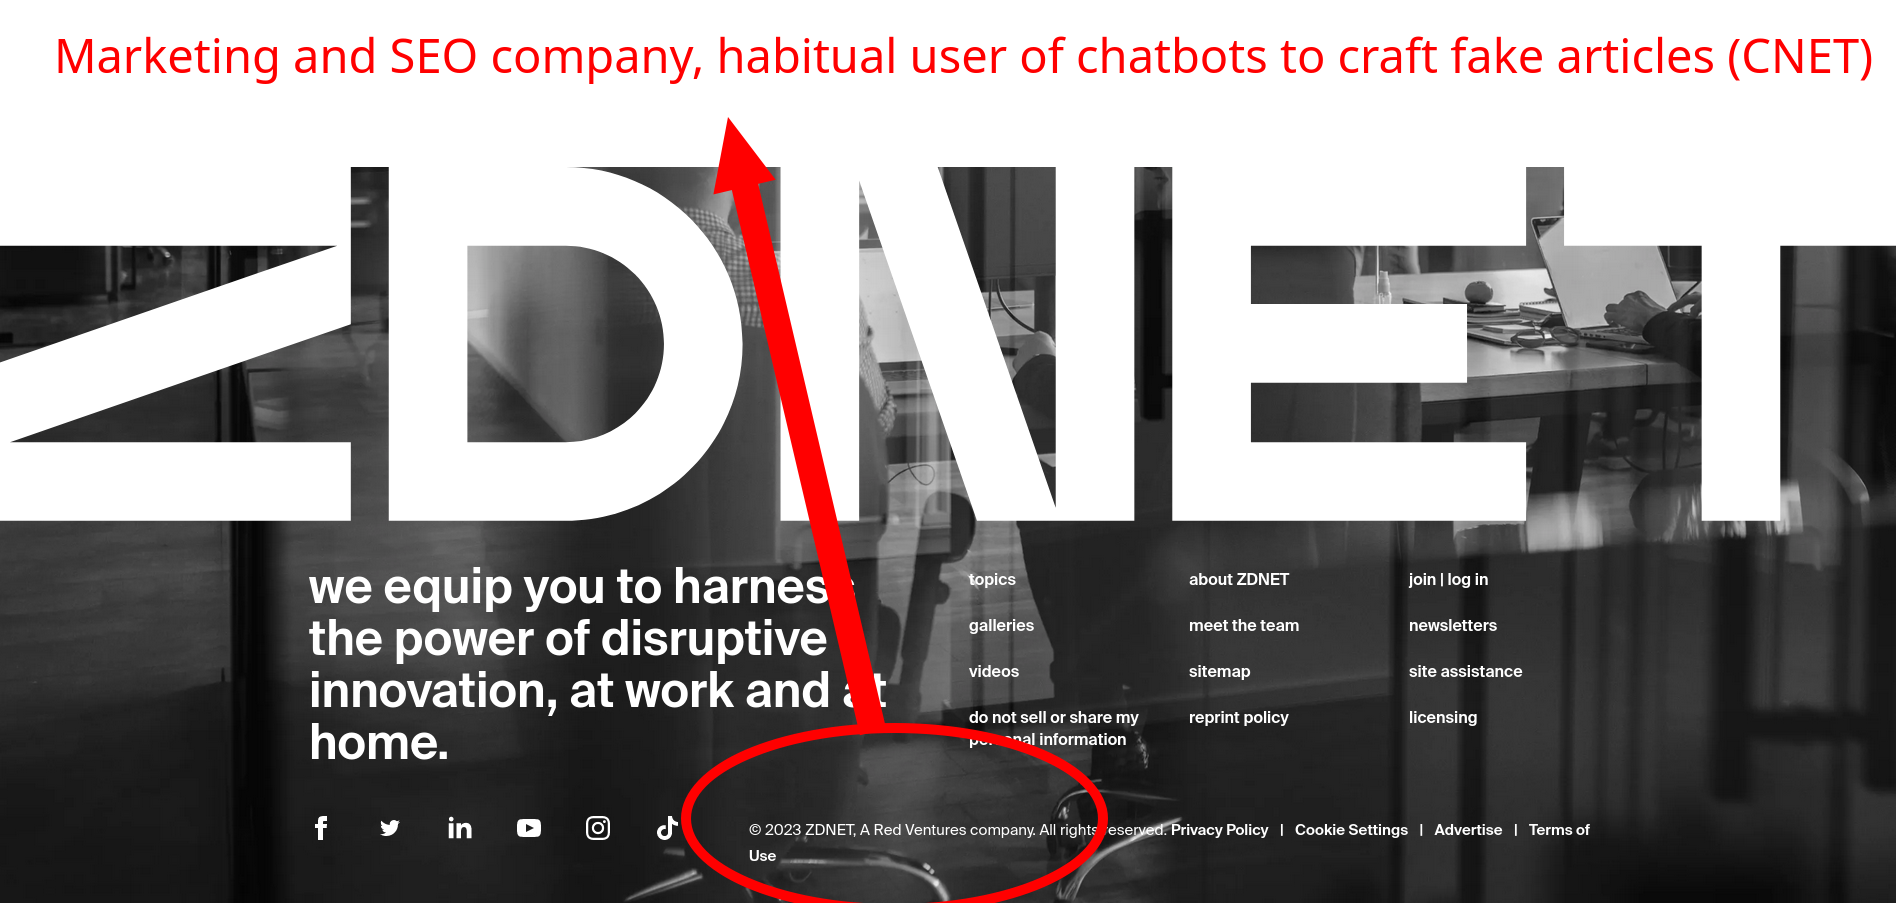 Red Ventures: Marketing and SEO company, habitual user of chatbots to craft fake articles (CNET)